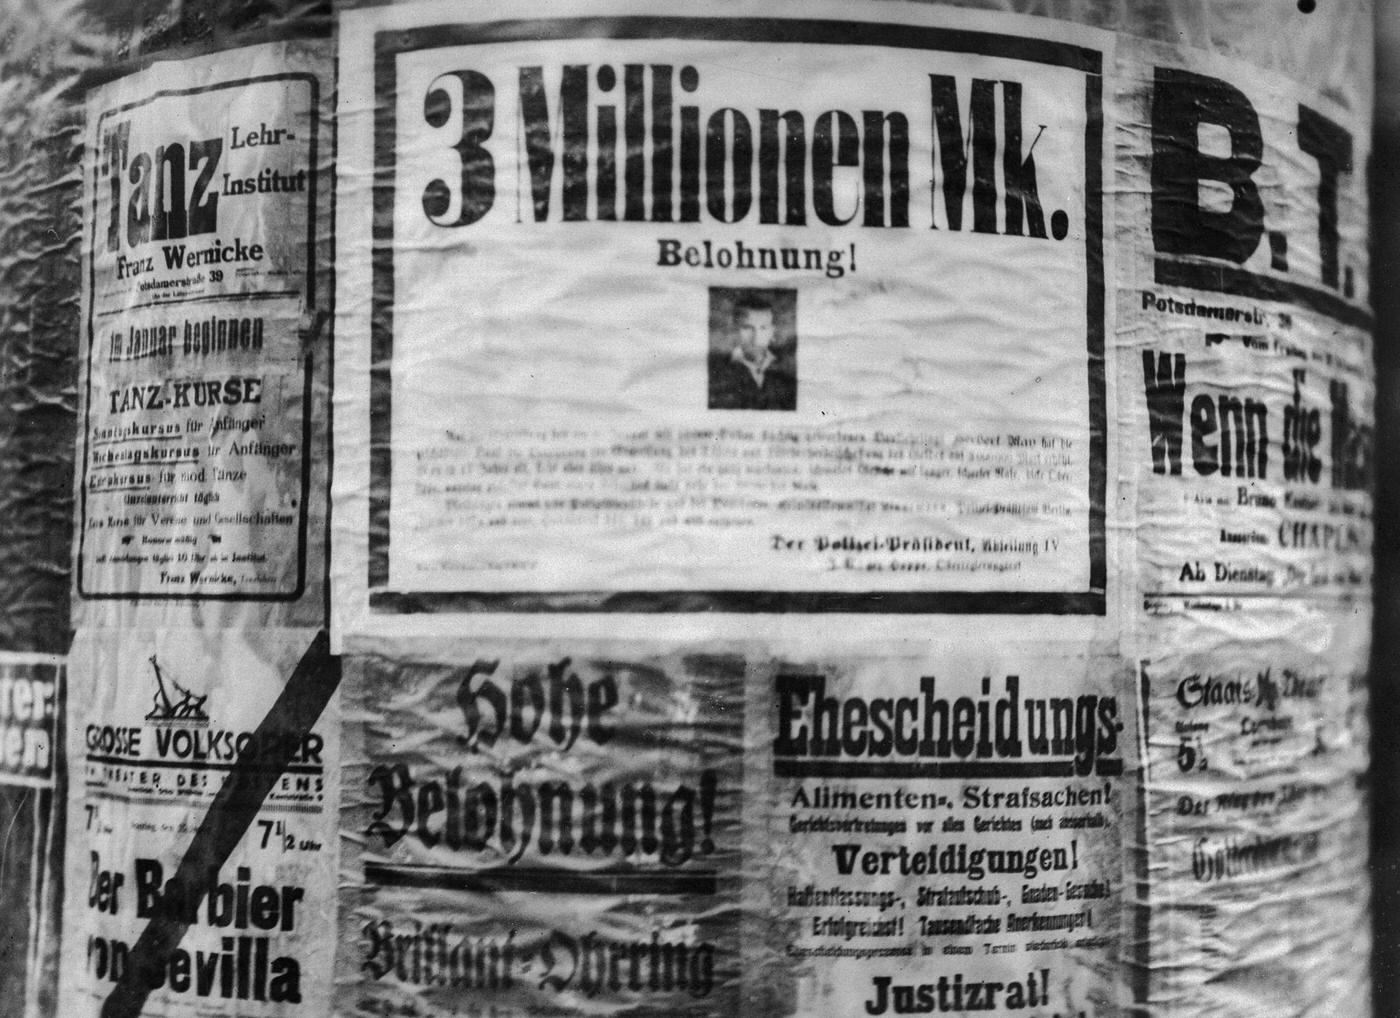 Germany's hyperinflation: poster offering three million mark reward, January 1923.